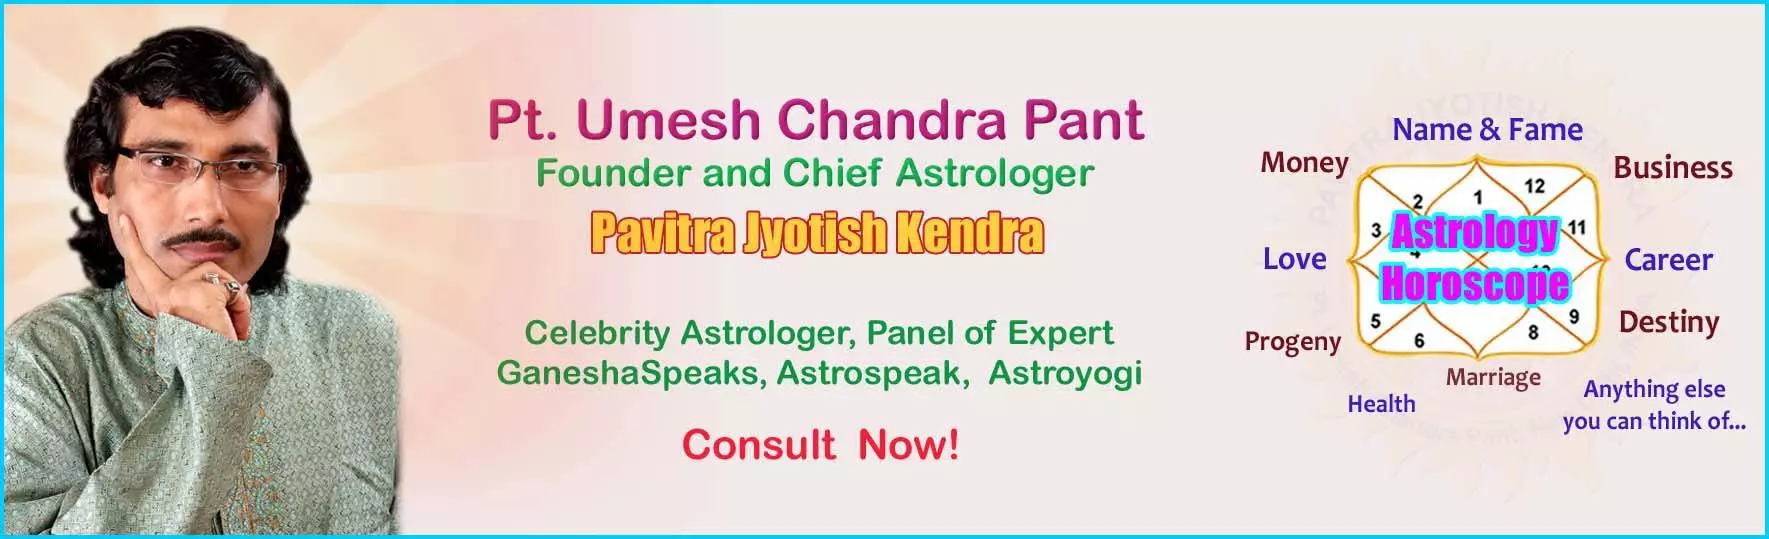 ABOUT ASTROLOGER